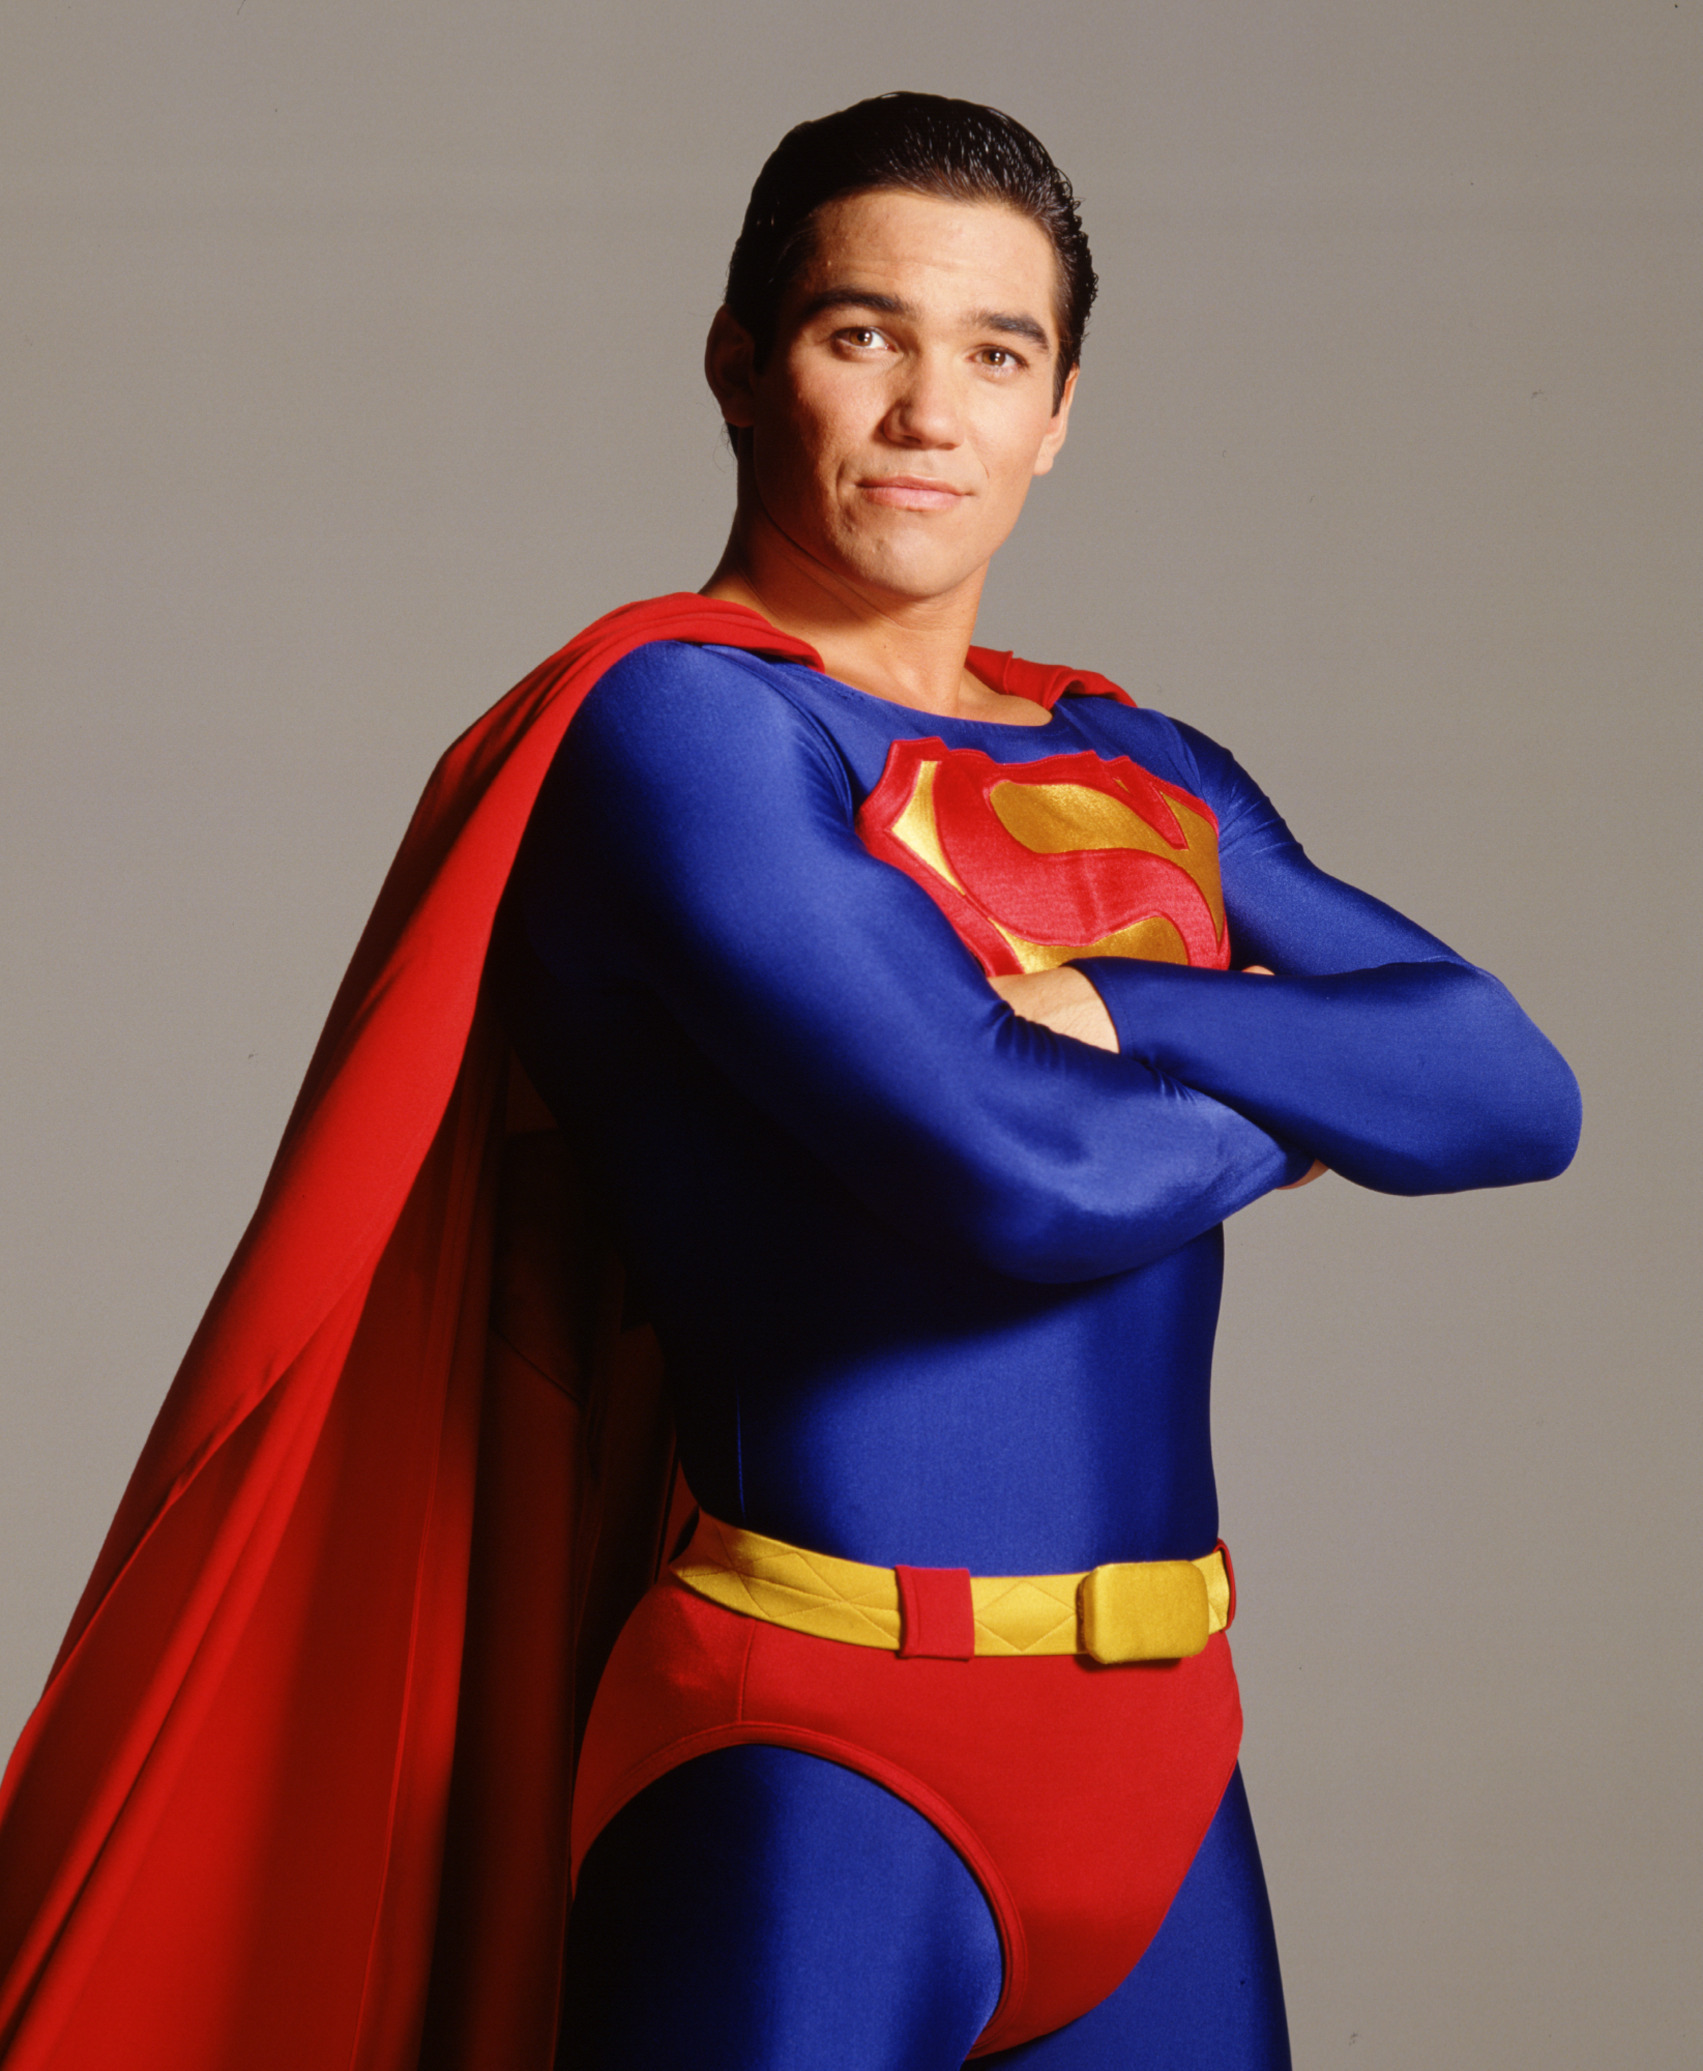 Dean Cain as Superman on "Lois and Clark: The New Adventures of Superman" on November 17, 2008. | Source: Getty Images